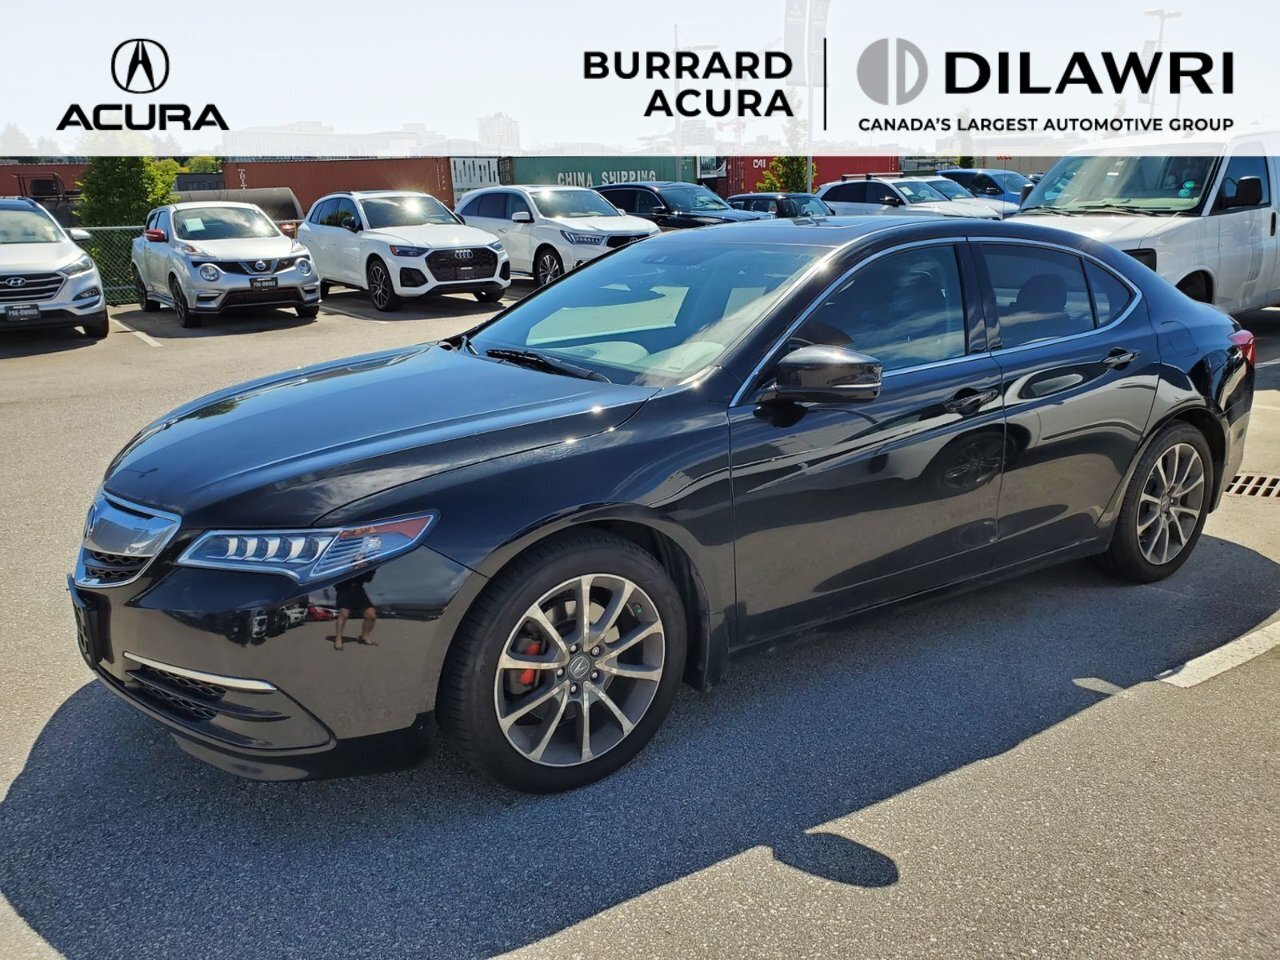 2015 Acura TLX 3.5L SH-AWD w/Tech Pkg | 1 Owner | No Accidents |